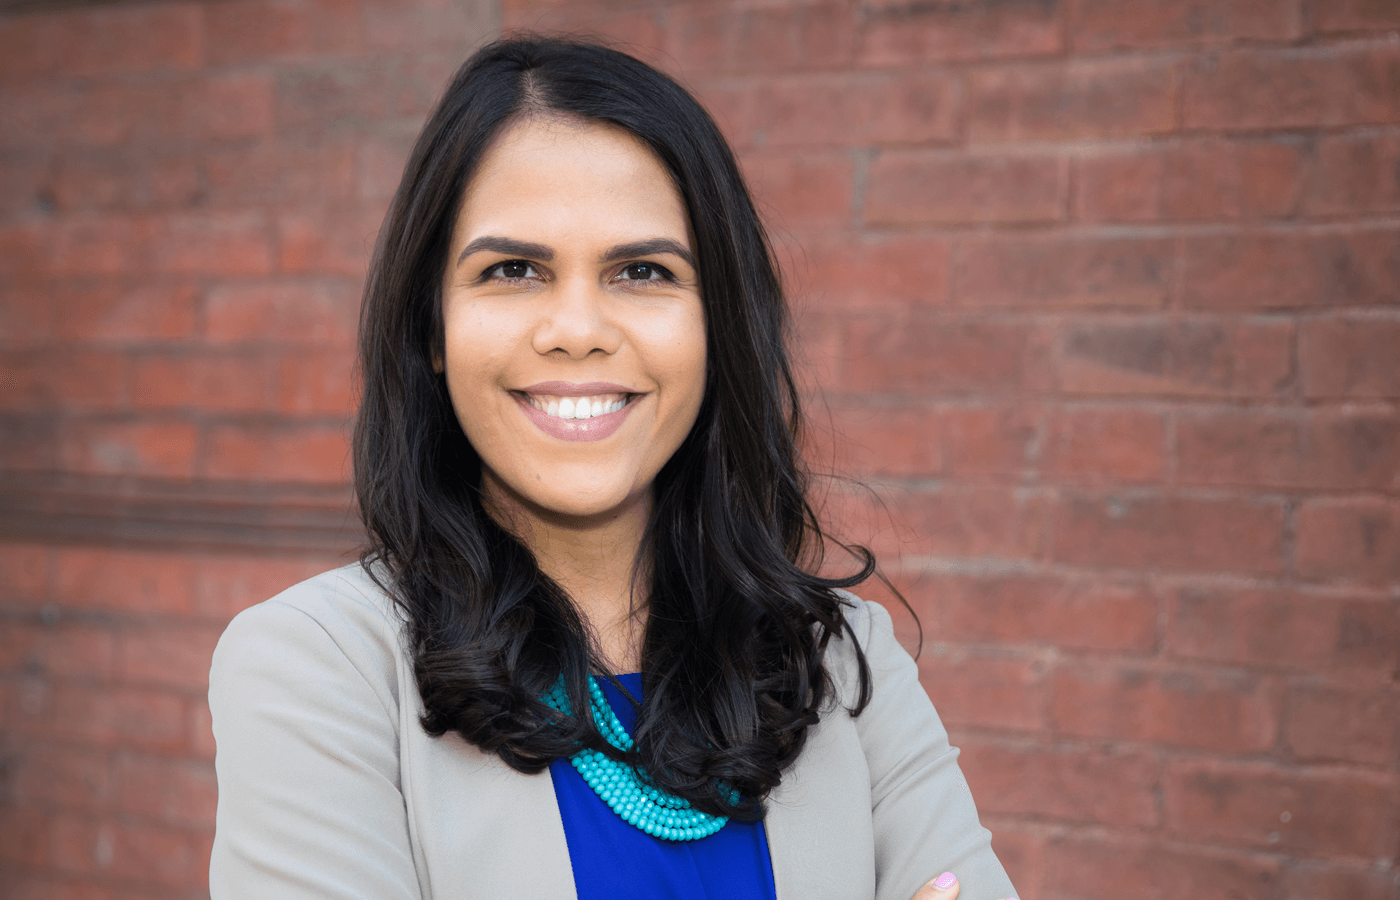 Aasimah Navlakhi was promoted to chief executive officer of BES after Linda Brown stepped down in 2018.